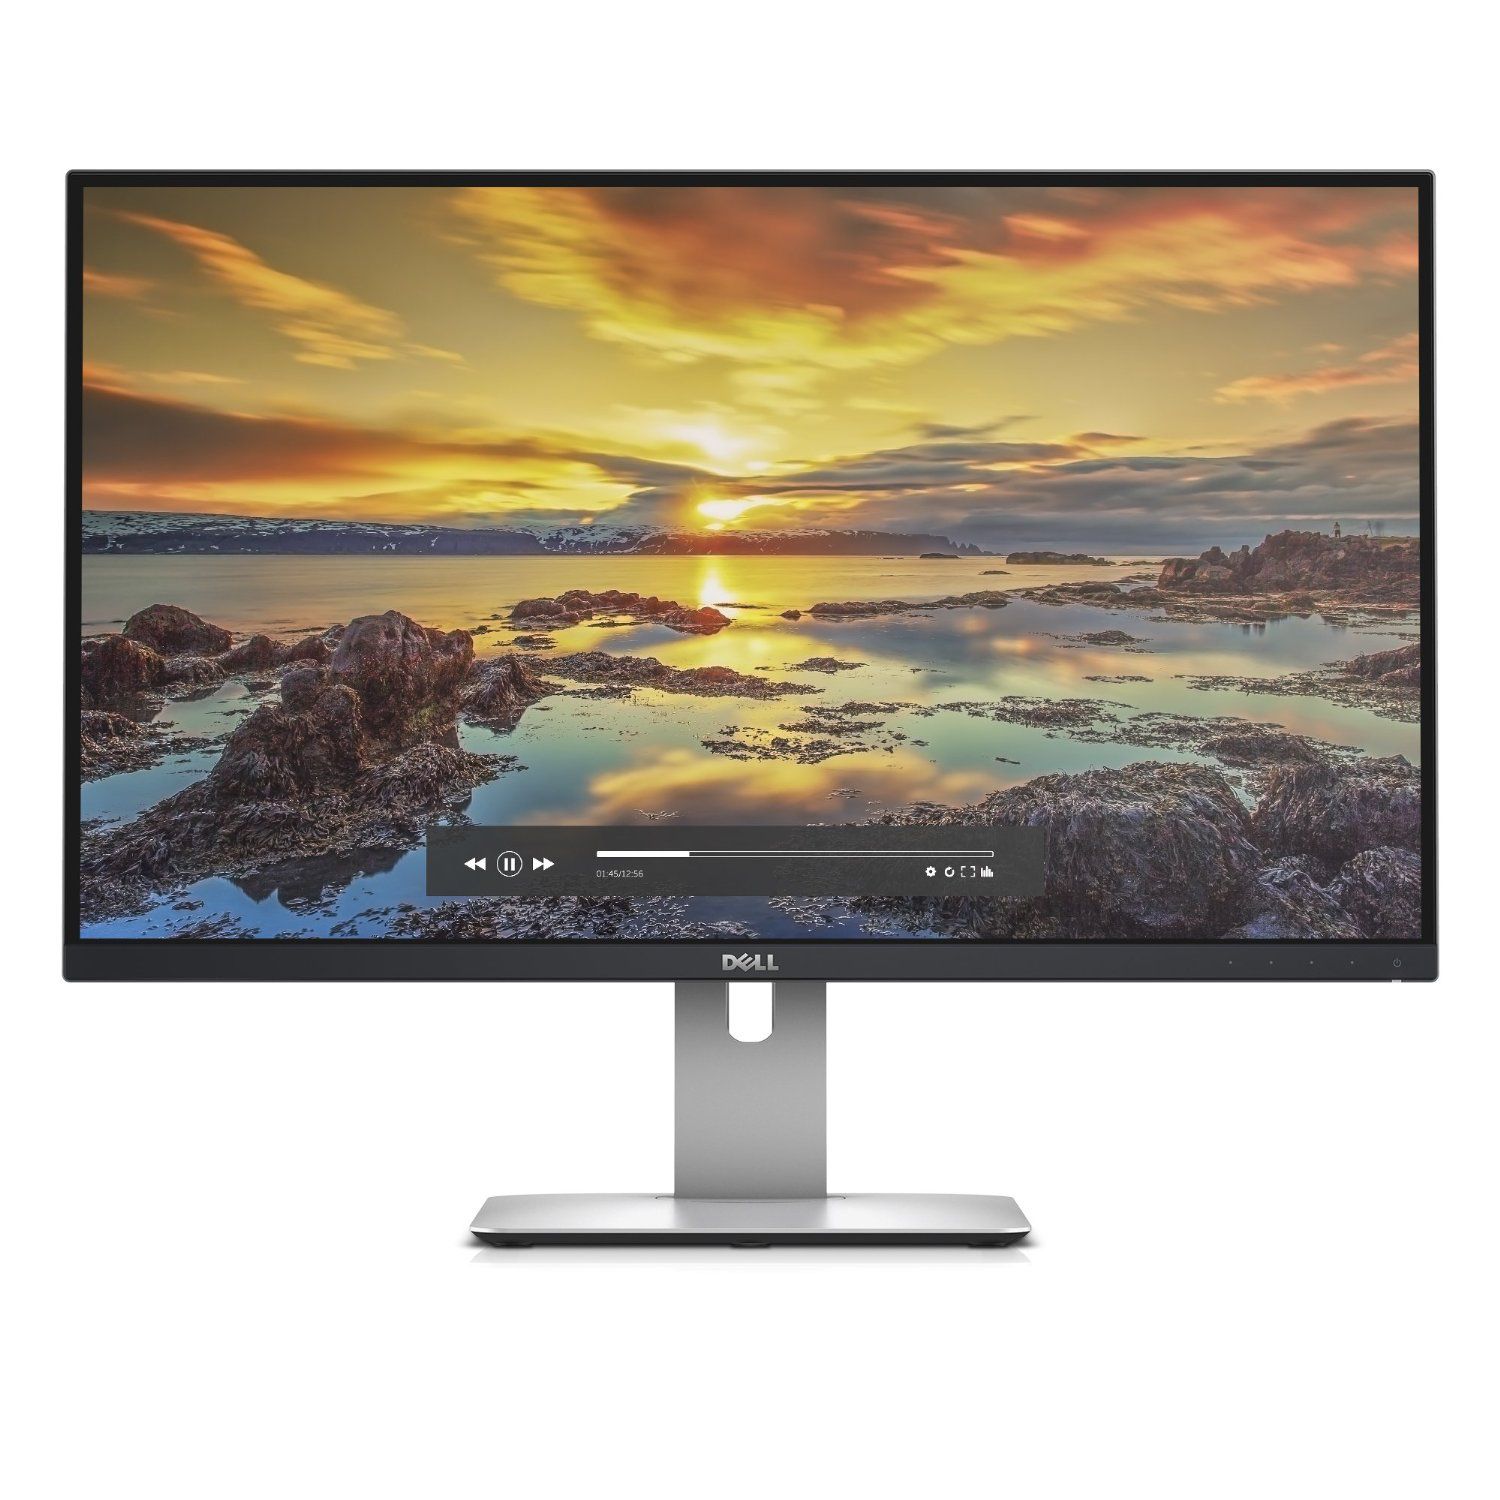 The 8 Best 27-Inch LCD Monitors to Buy in 2018